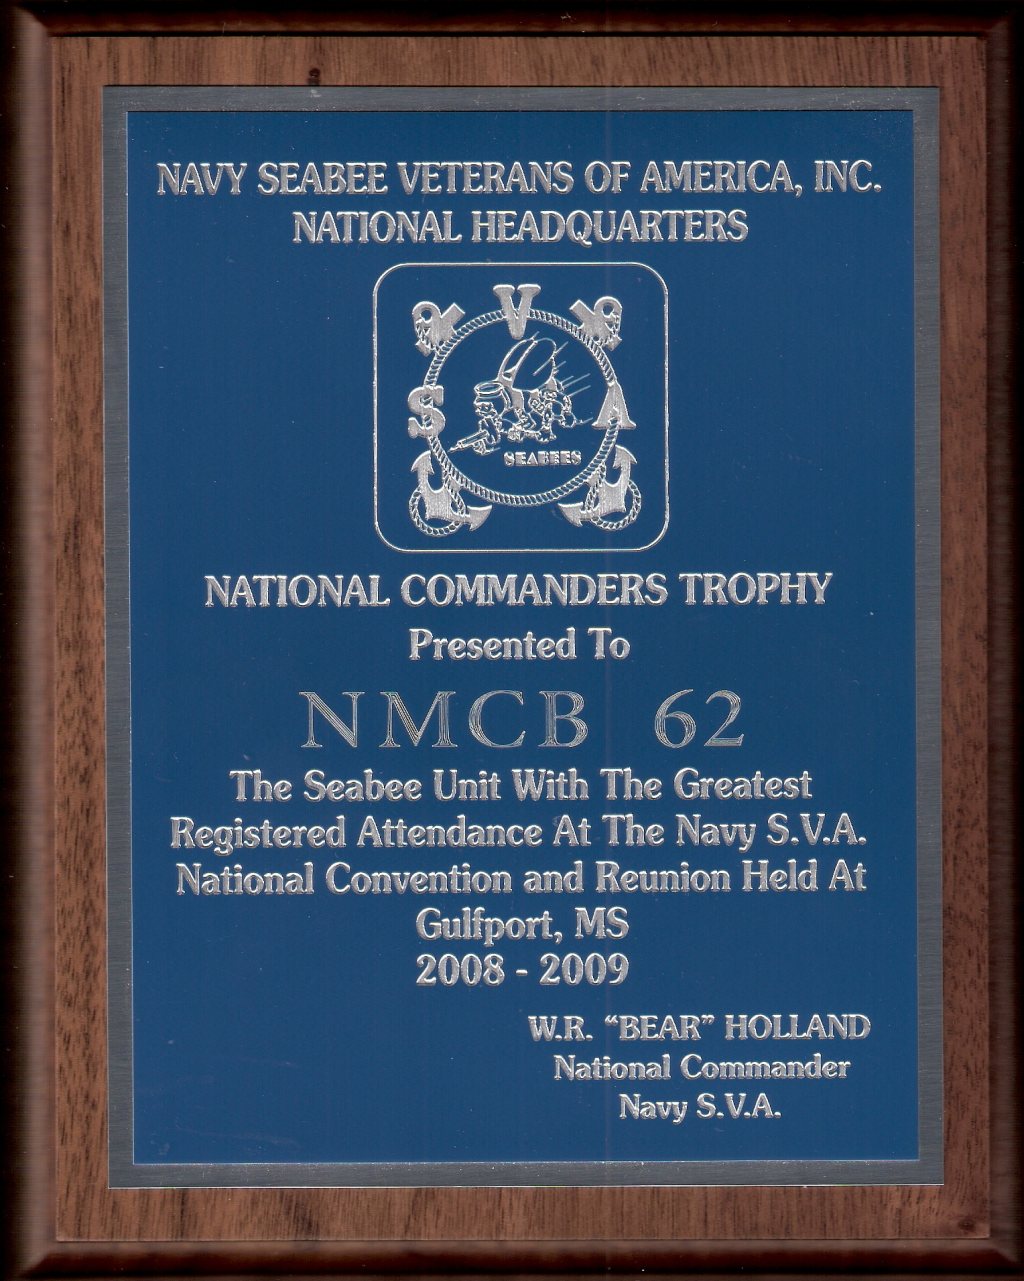 National Commanders Trophy October 2009 National Convention Gulfport, MS